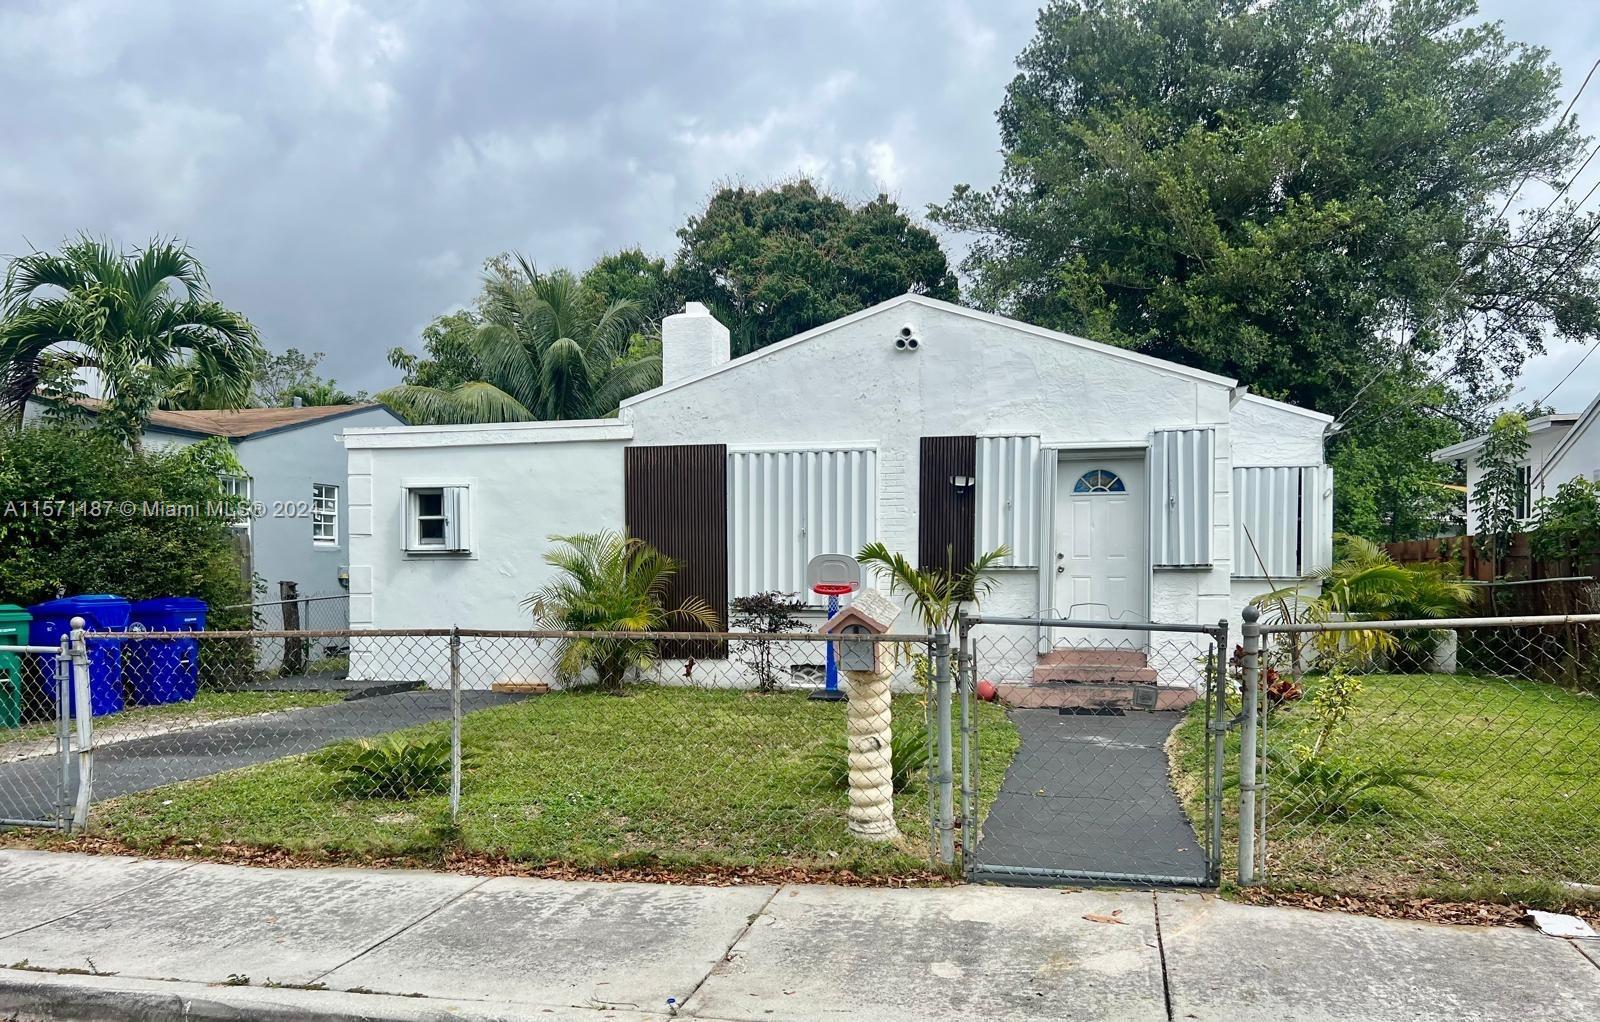 Photo of 47 NW 49th St in Miami, FL